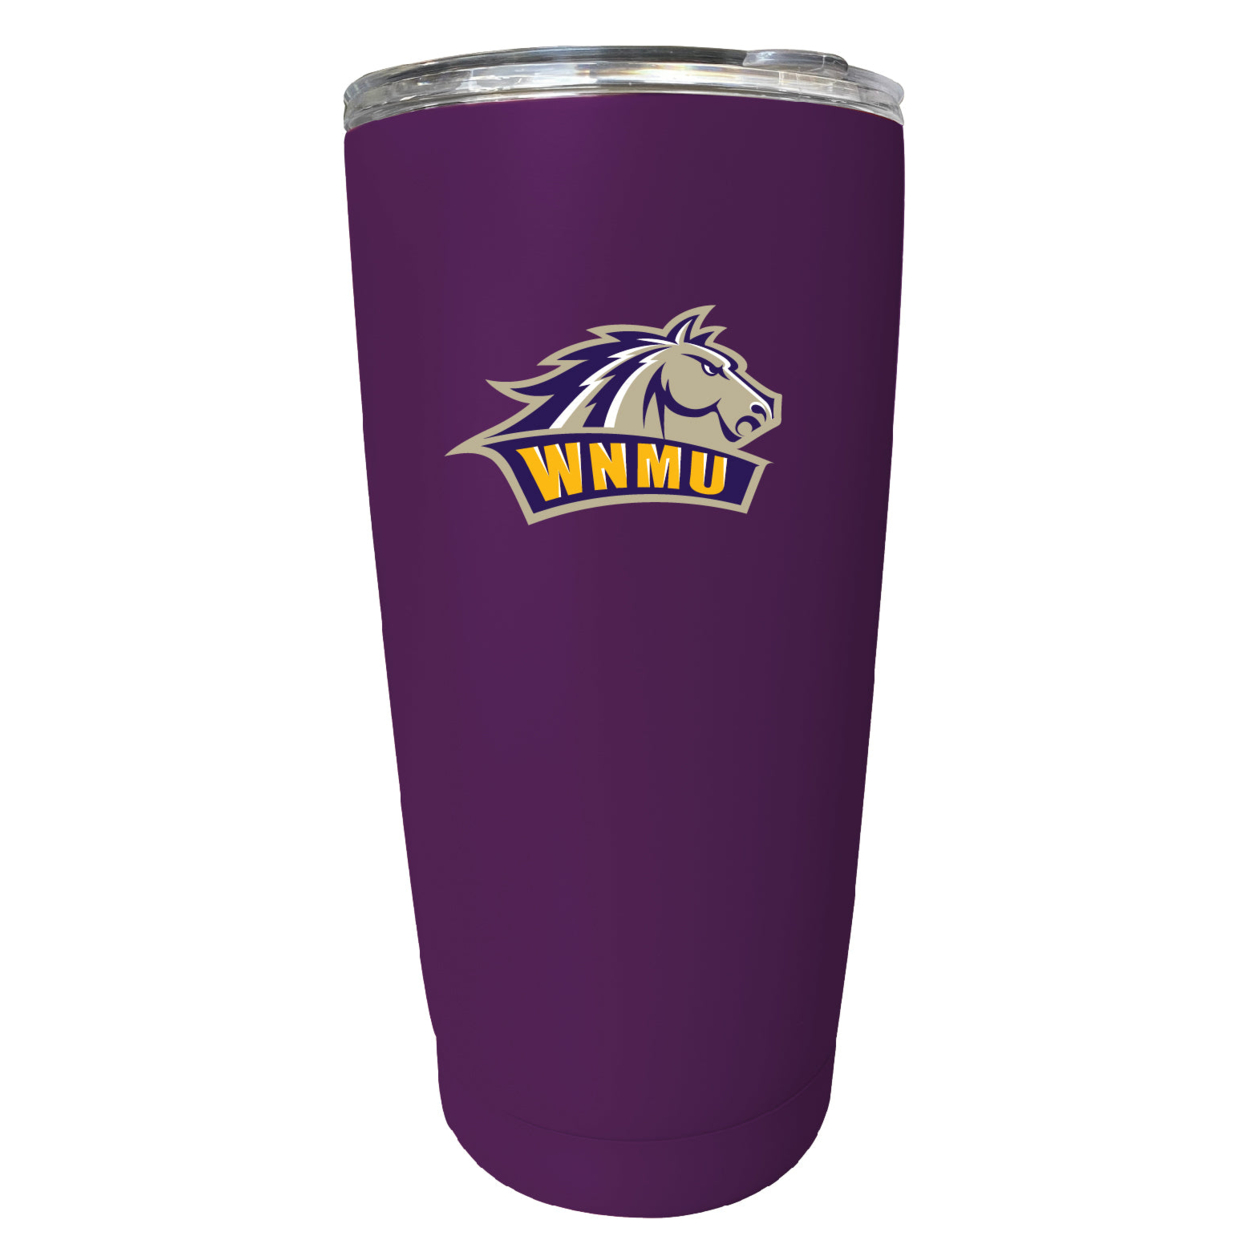 Western New Mexico University 16 Oz Stainless Steel Insulated Tumbler - Yellow